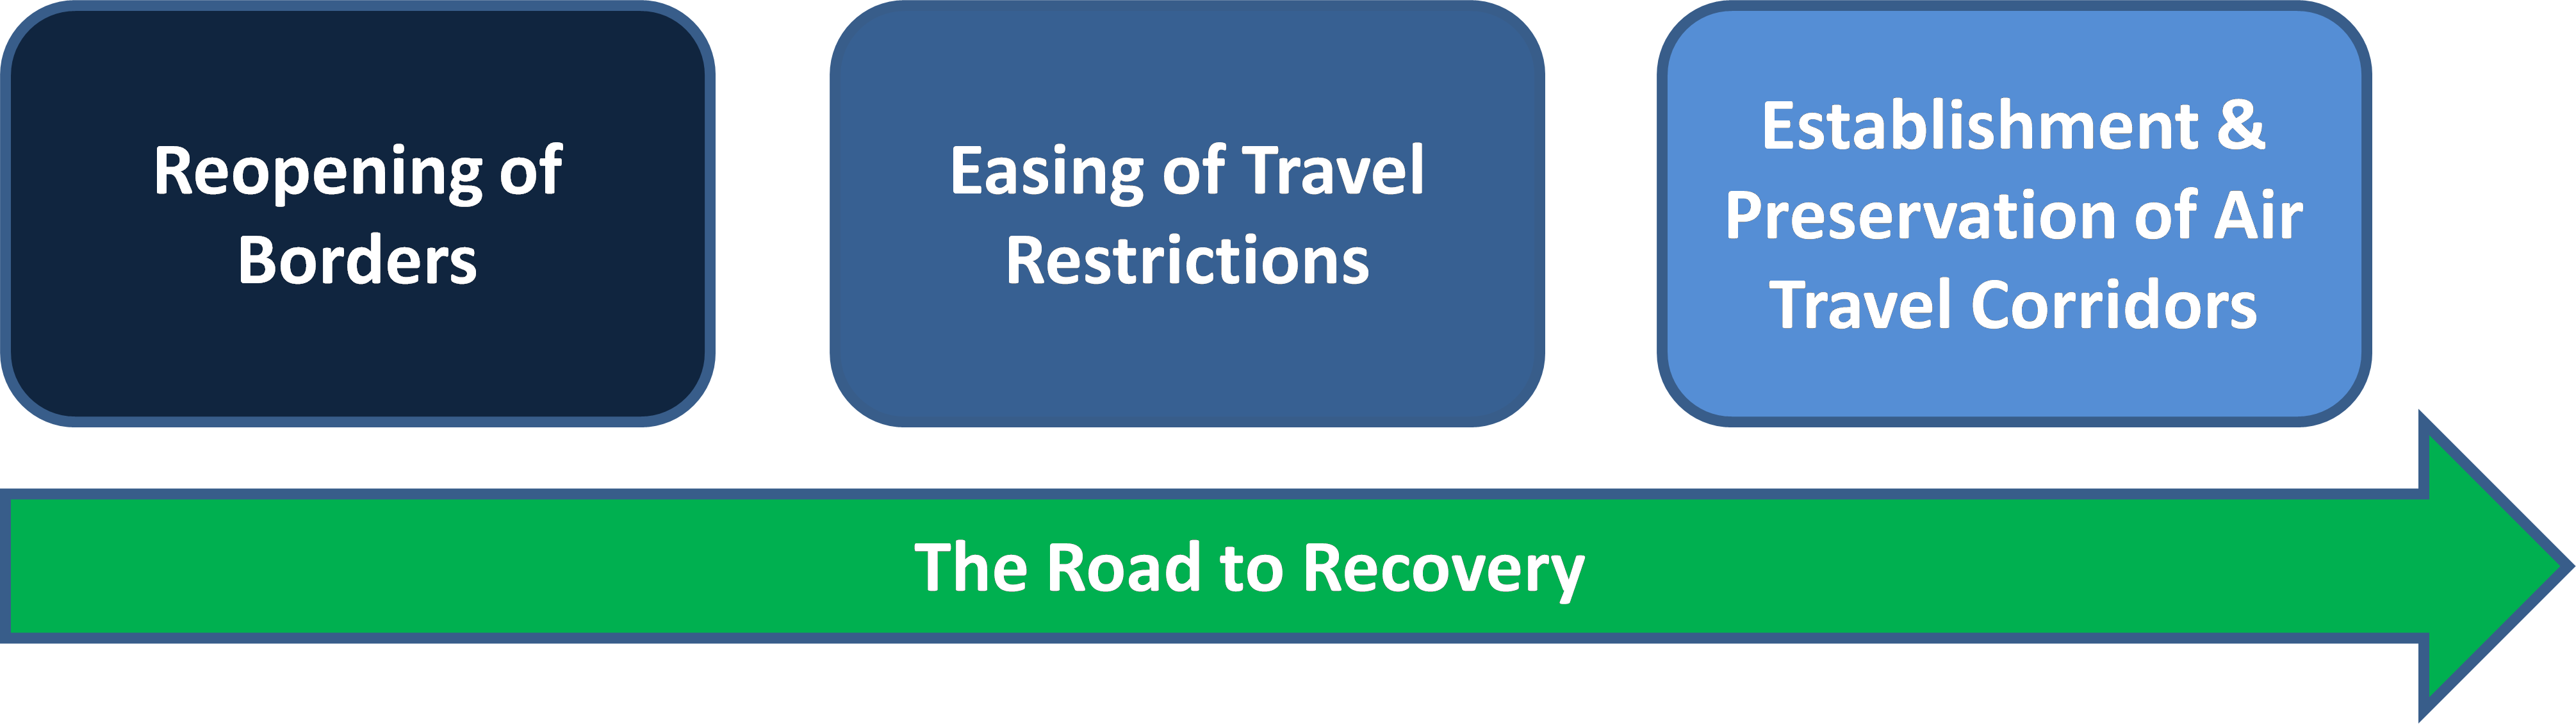 Road to Recovery Airlines